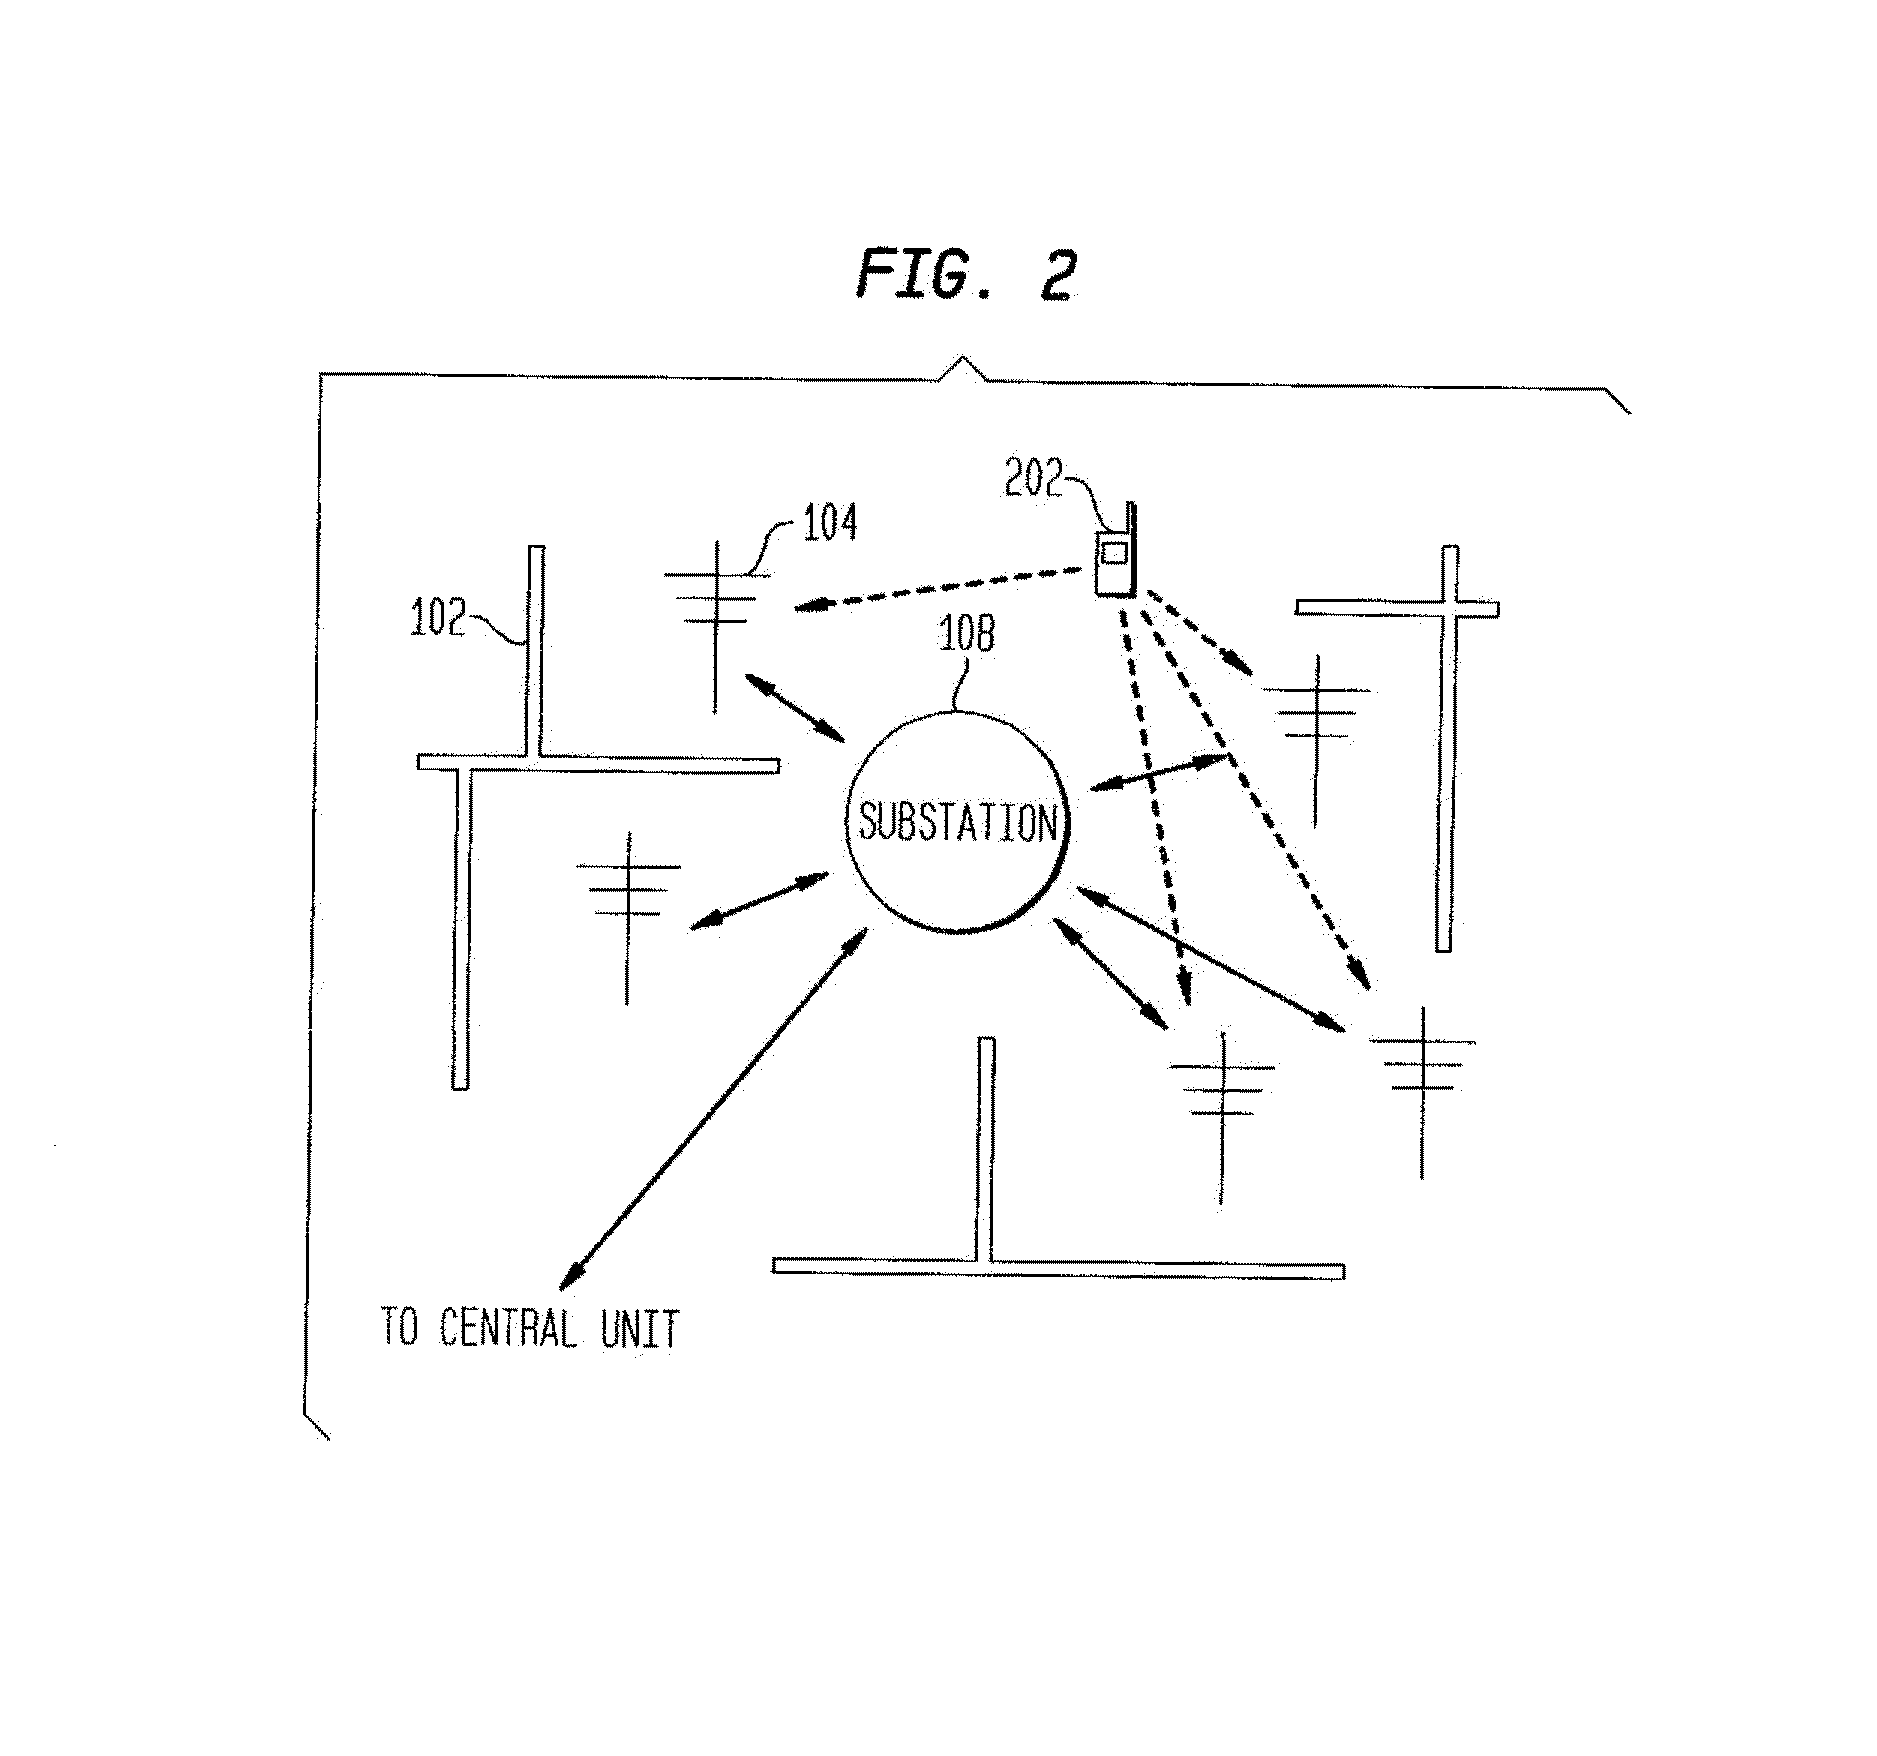 Systems and Methods for Detecting and Controlling Transmission Devices